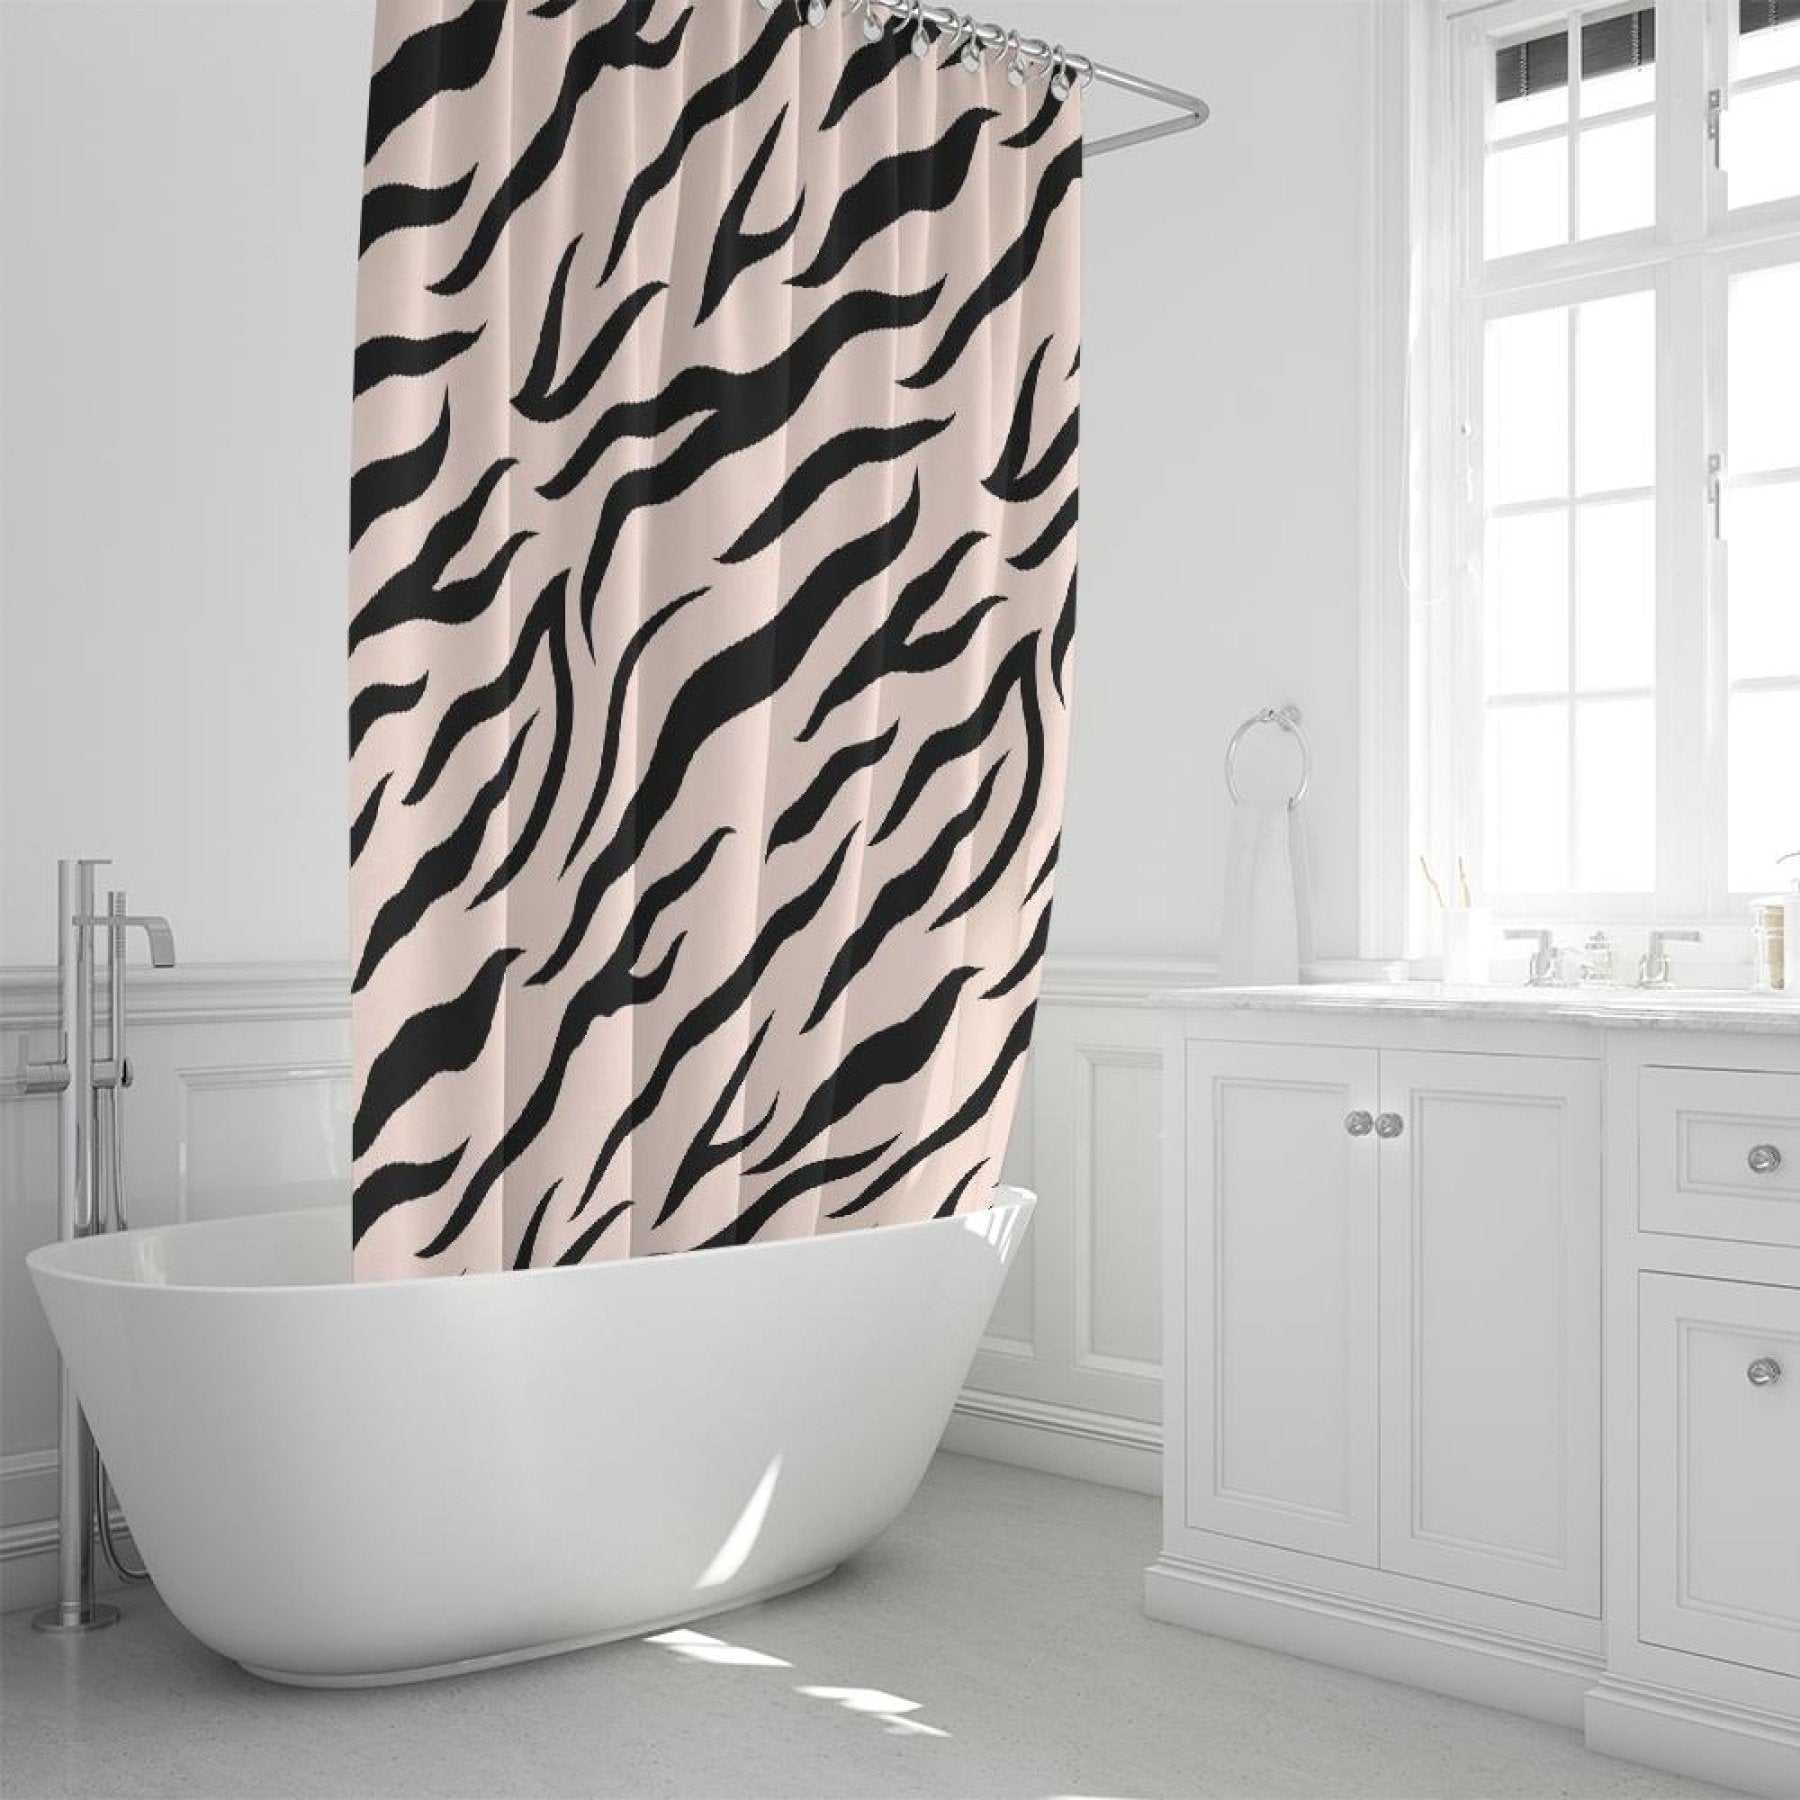 Decorative Shower Curtain - Pinkly Wild Style Curtain 72x72 inch